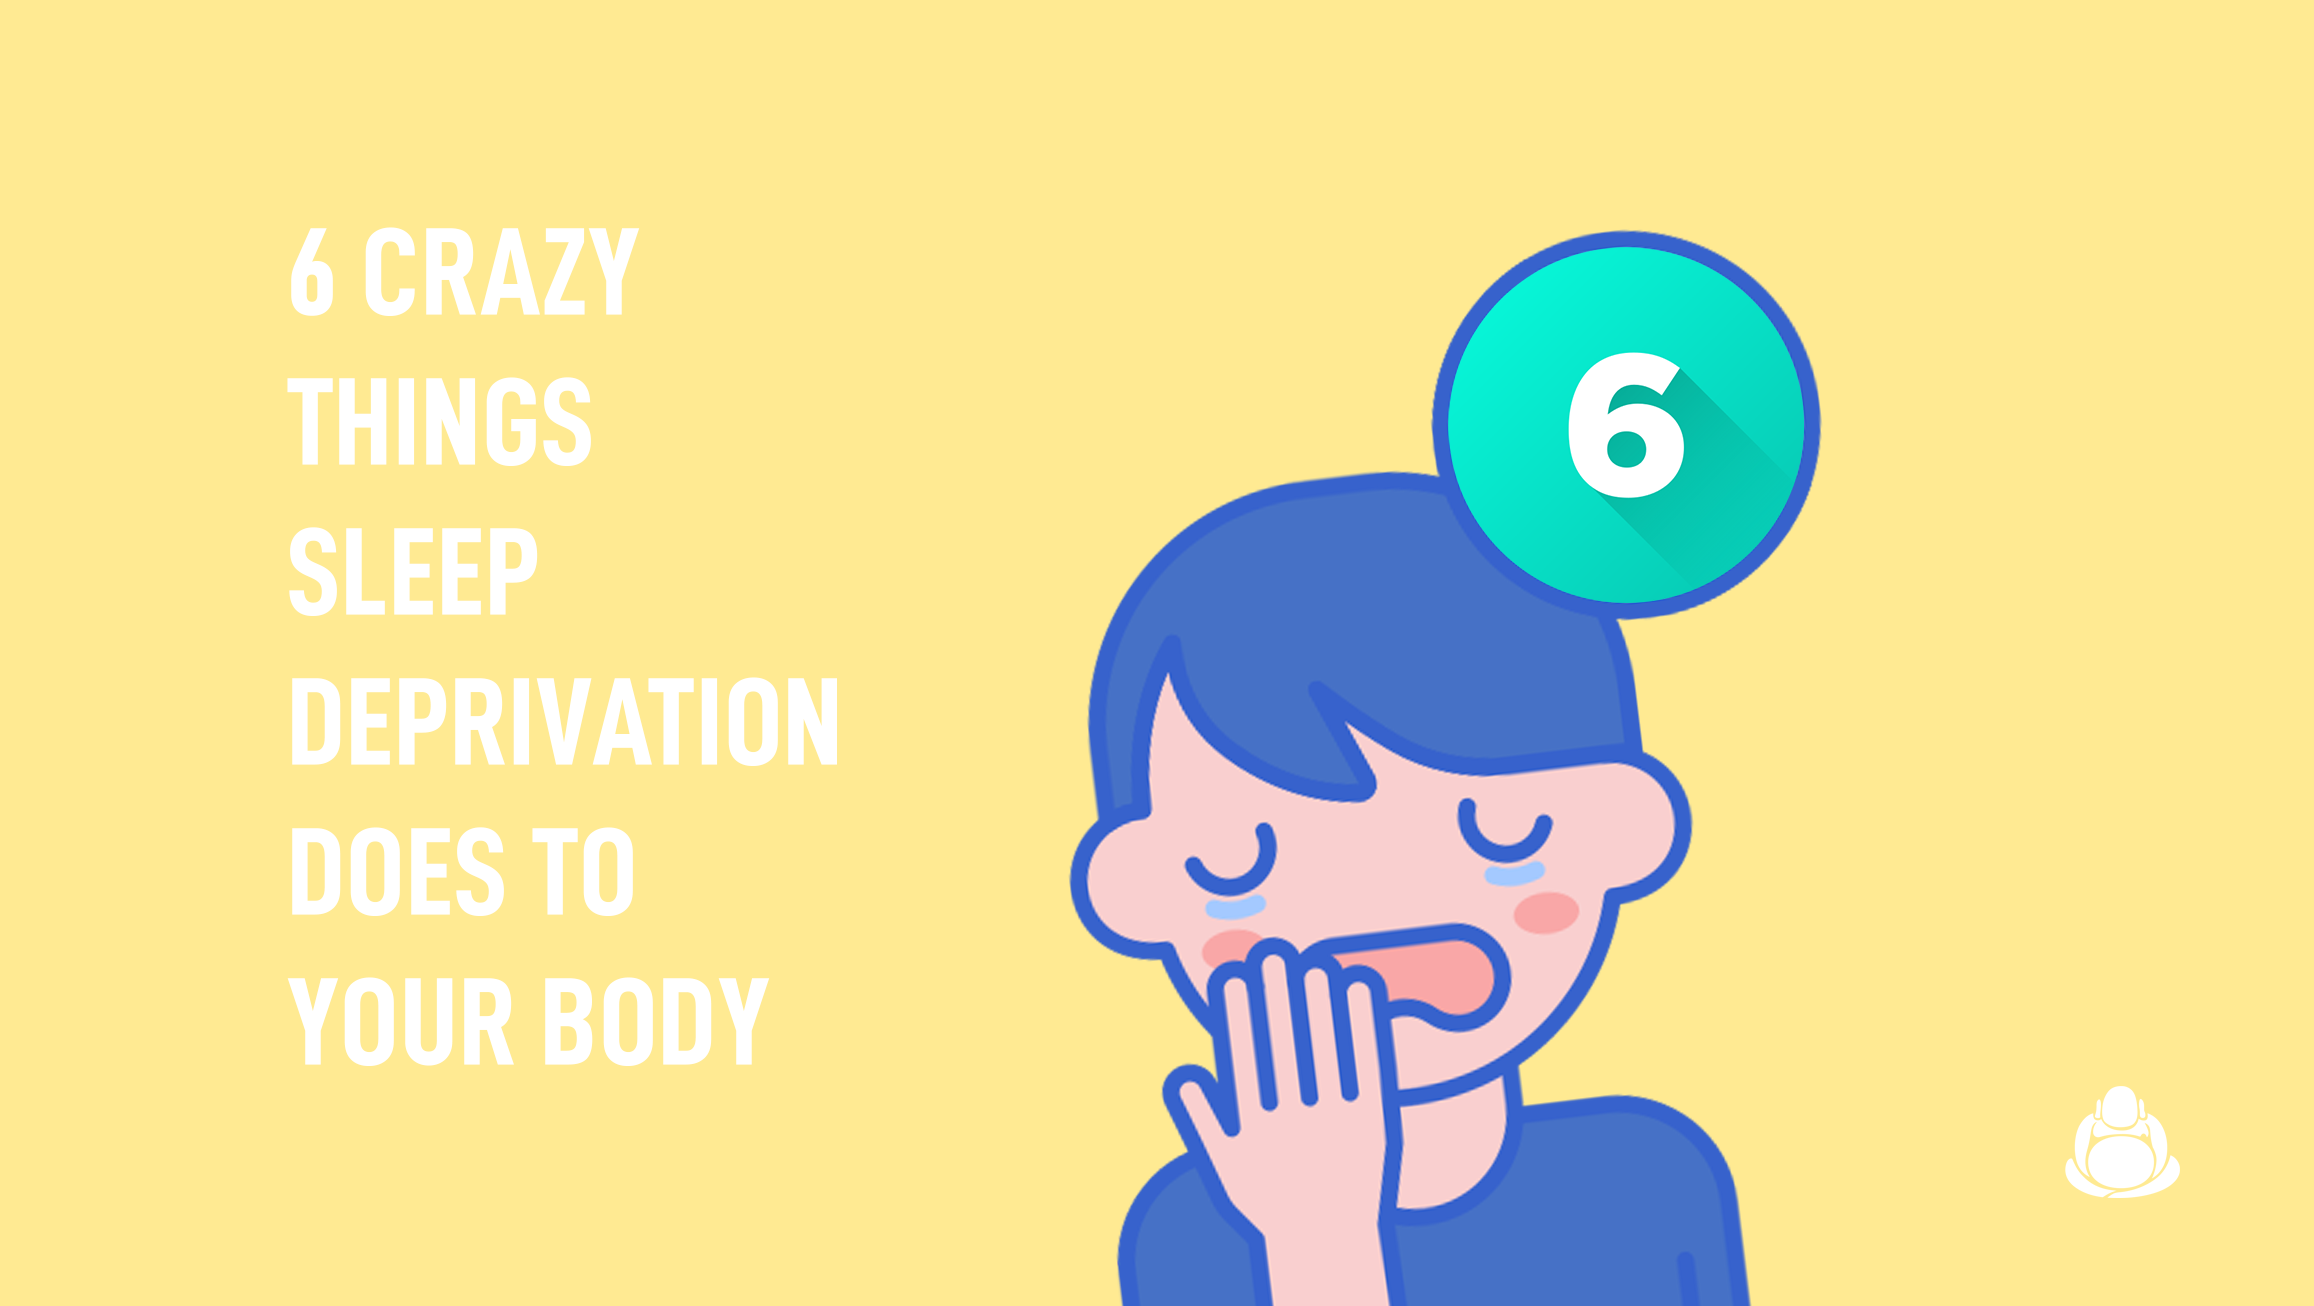 6 CRAZY THINGS SLEEP DEPRIVATION DOES TO YOUR BODY (AND HOW TO FIX IT)